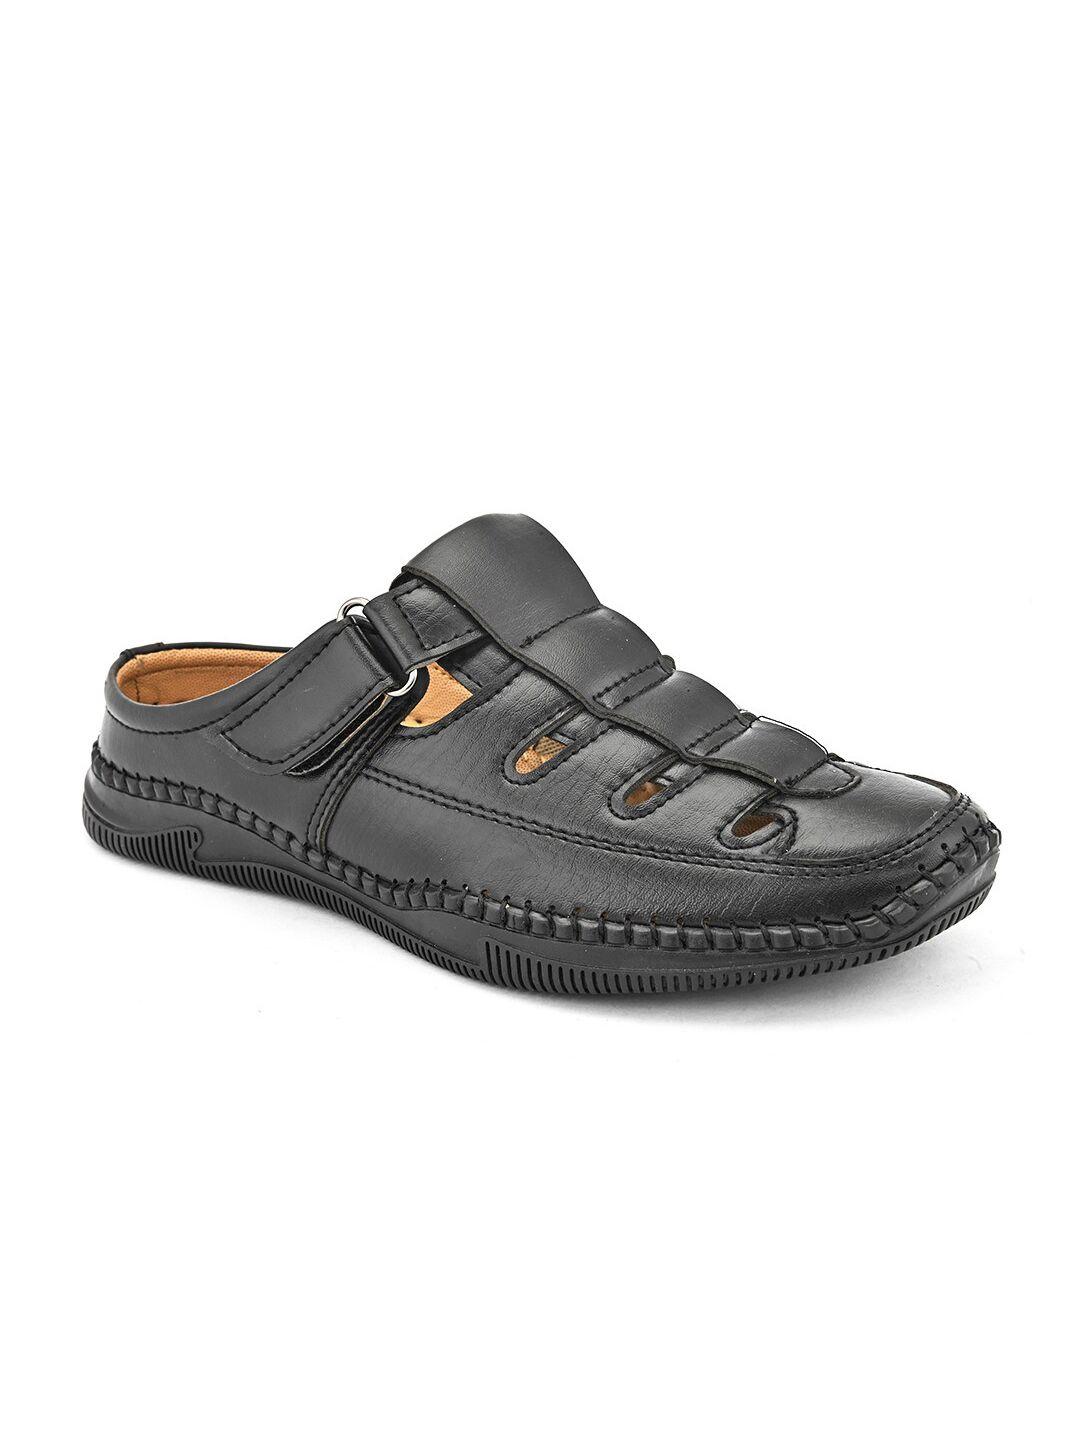 the roadster lifestyle co. men textured comfort sandals